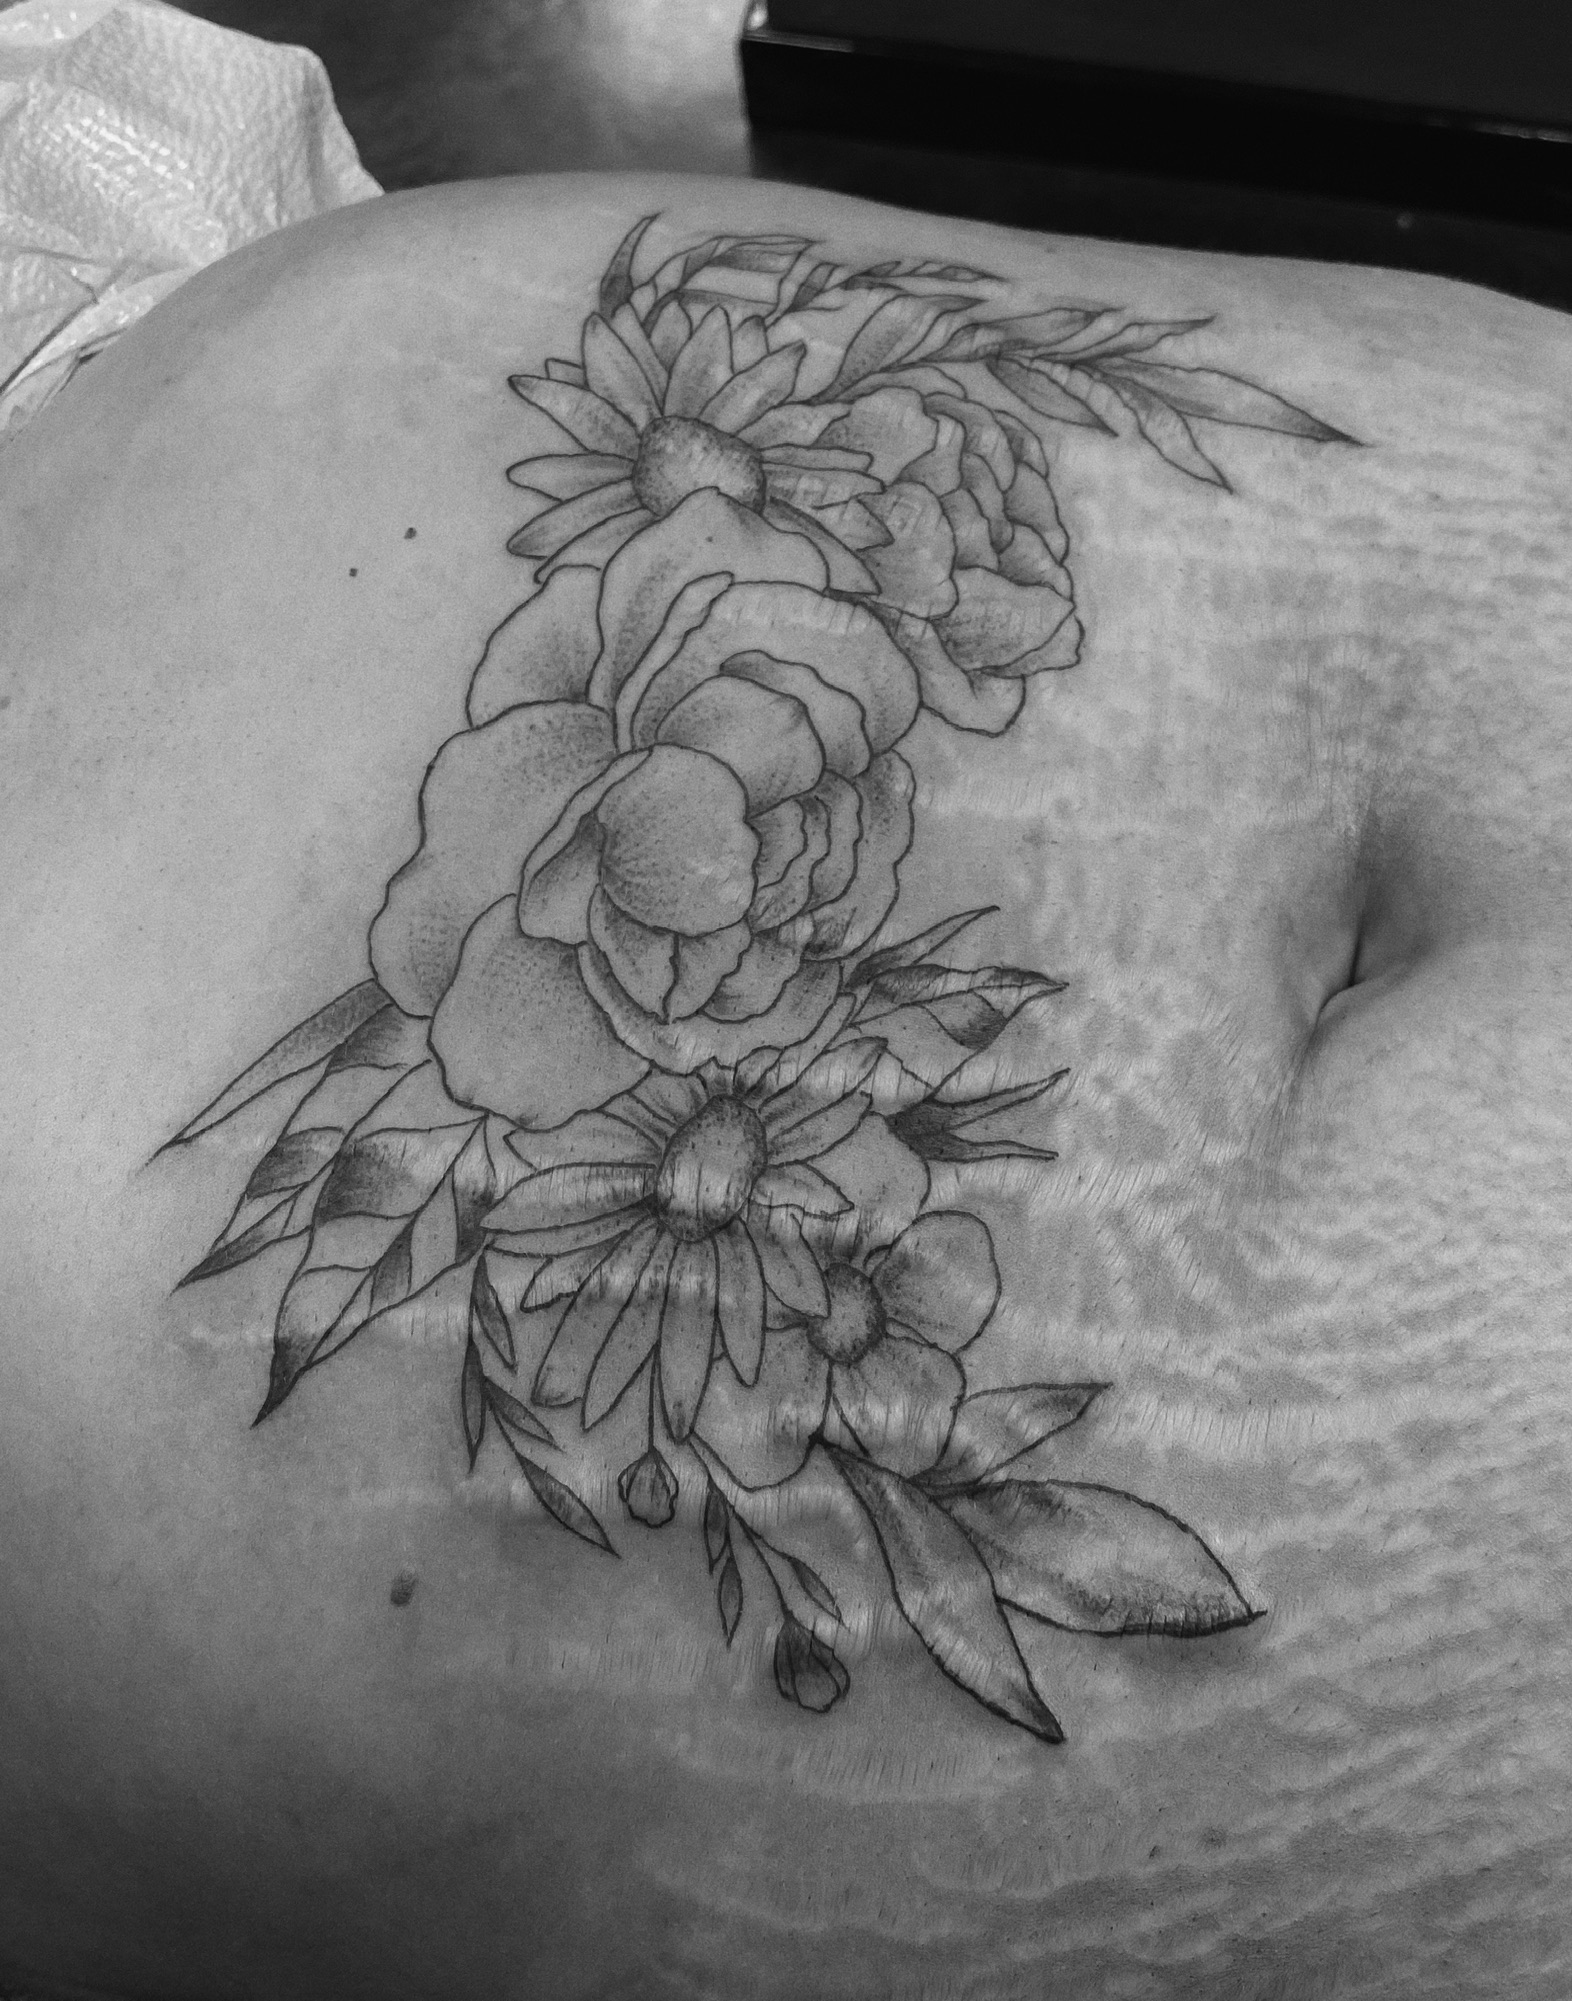 Stretch marks and tattoos – Things&Ink